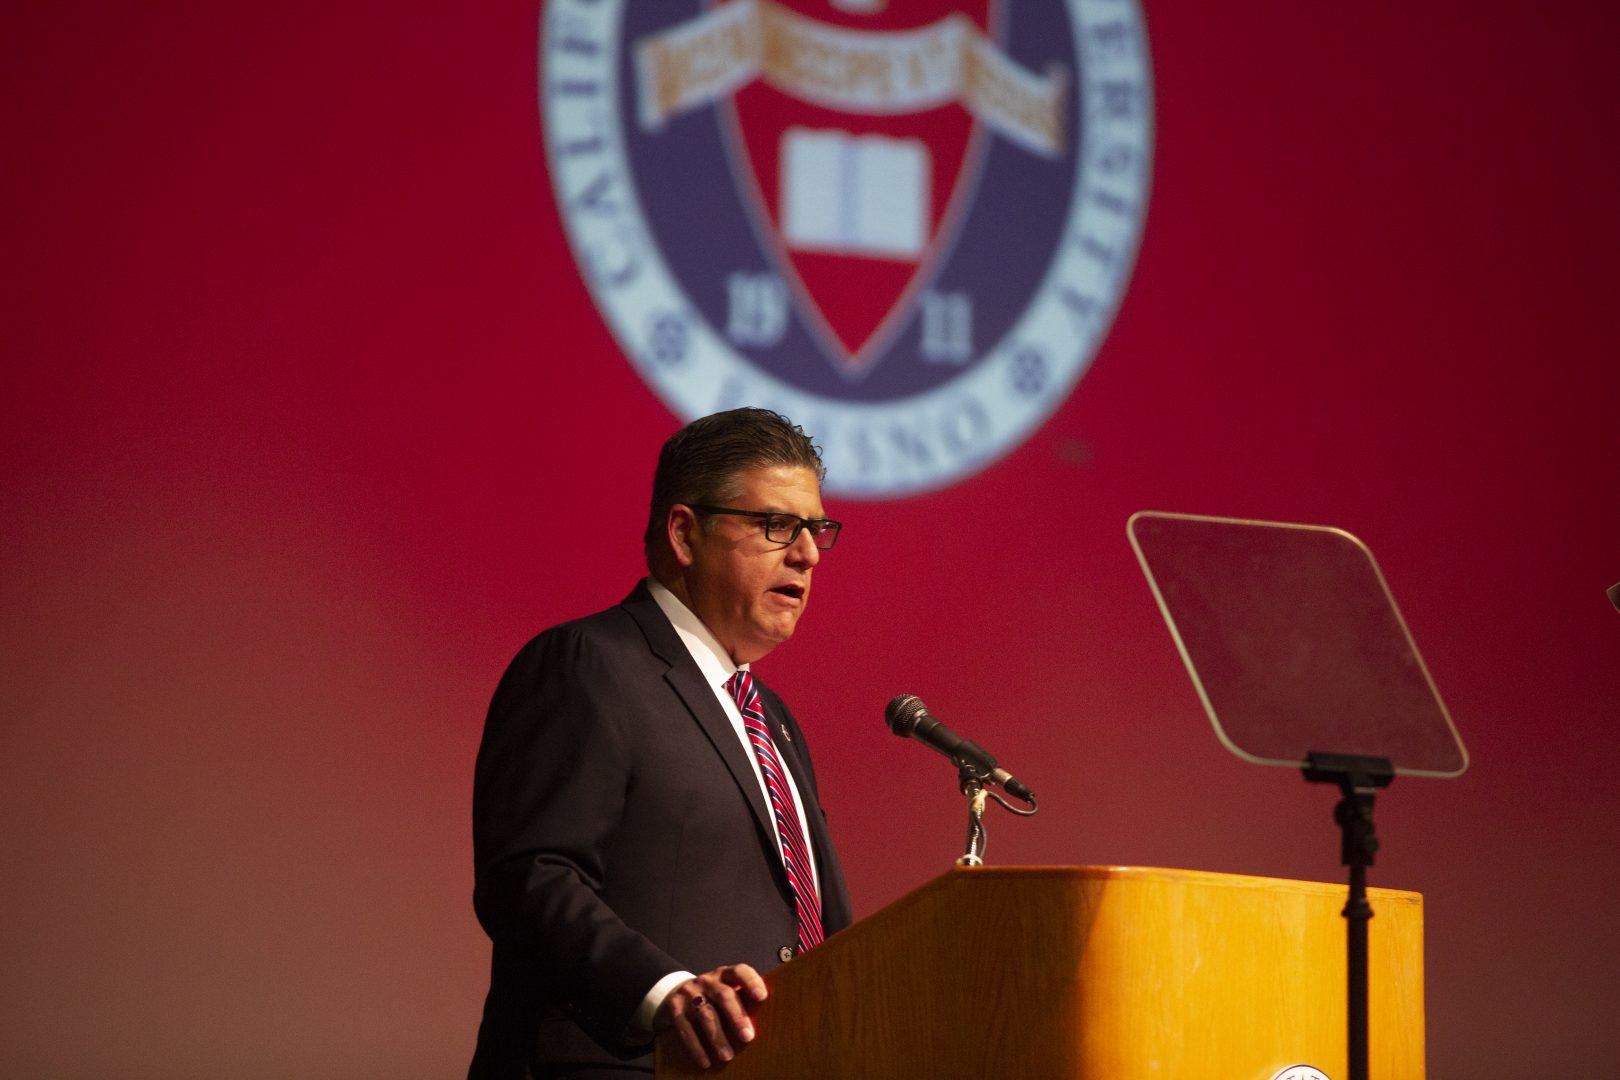 Castro discusses upcoming university goals and new projects at 2019 Fall Assembly on Aug. 19 at the Satellite Student Union. (Larry Valenzuela/The Collegian)